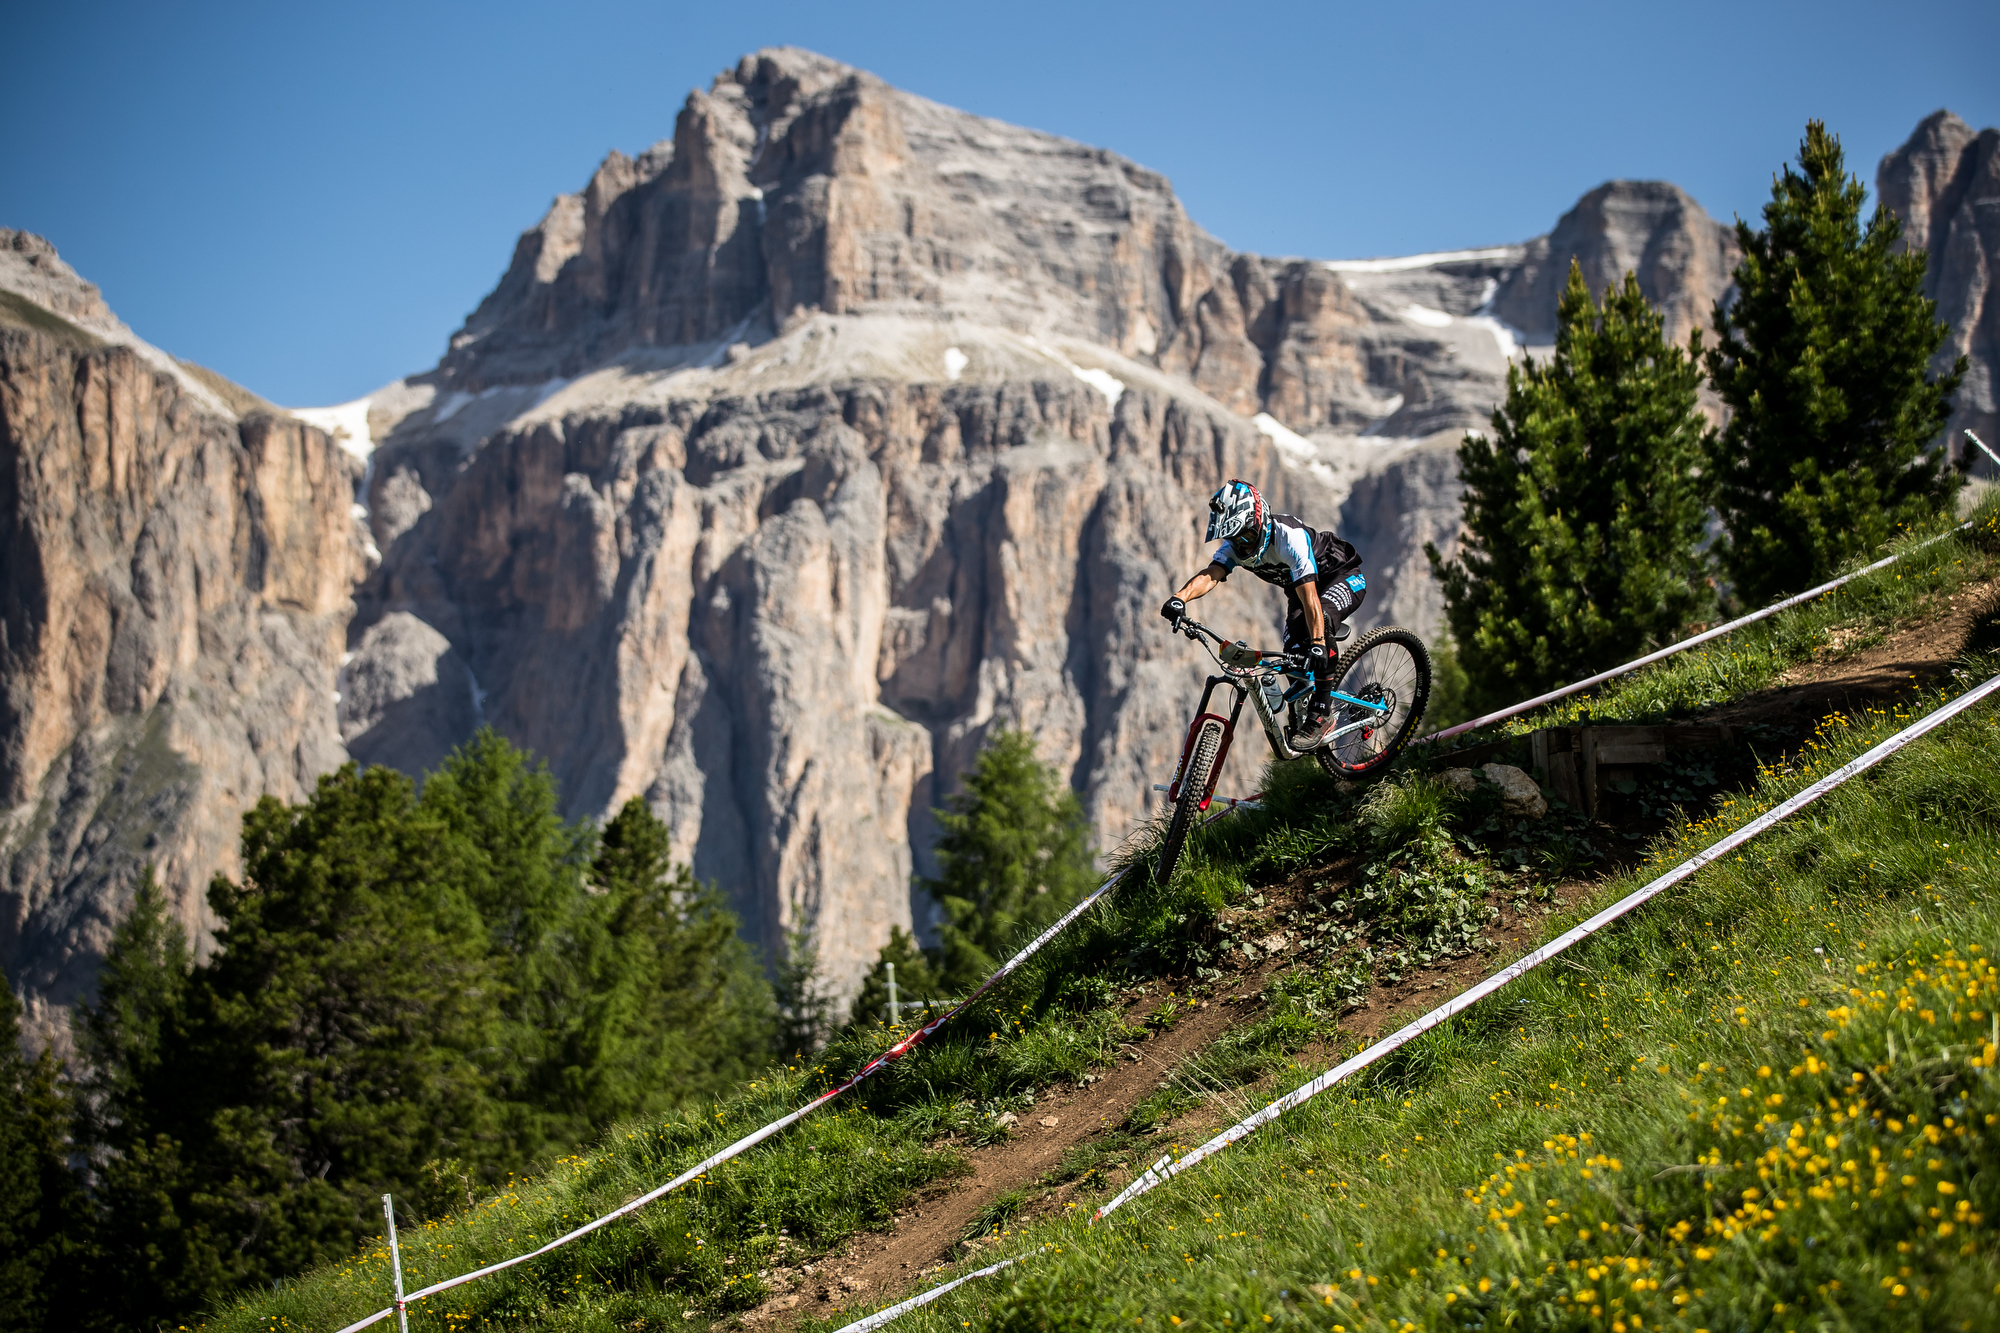 Dimitri Tordo sails off of a drop in front of a beautiful mountain setting.